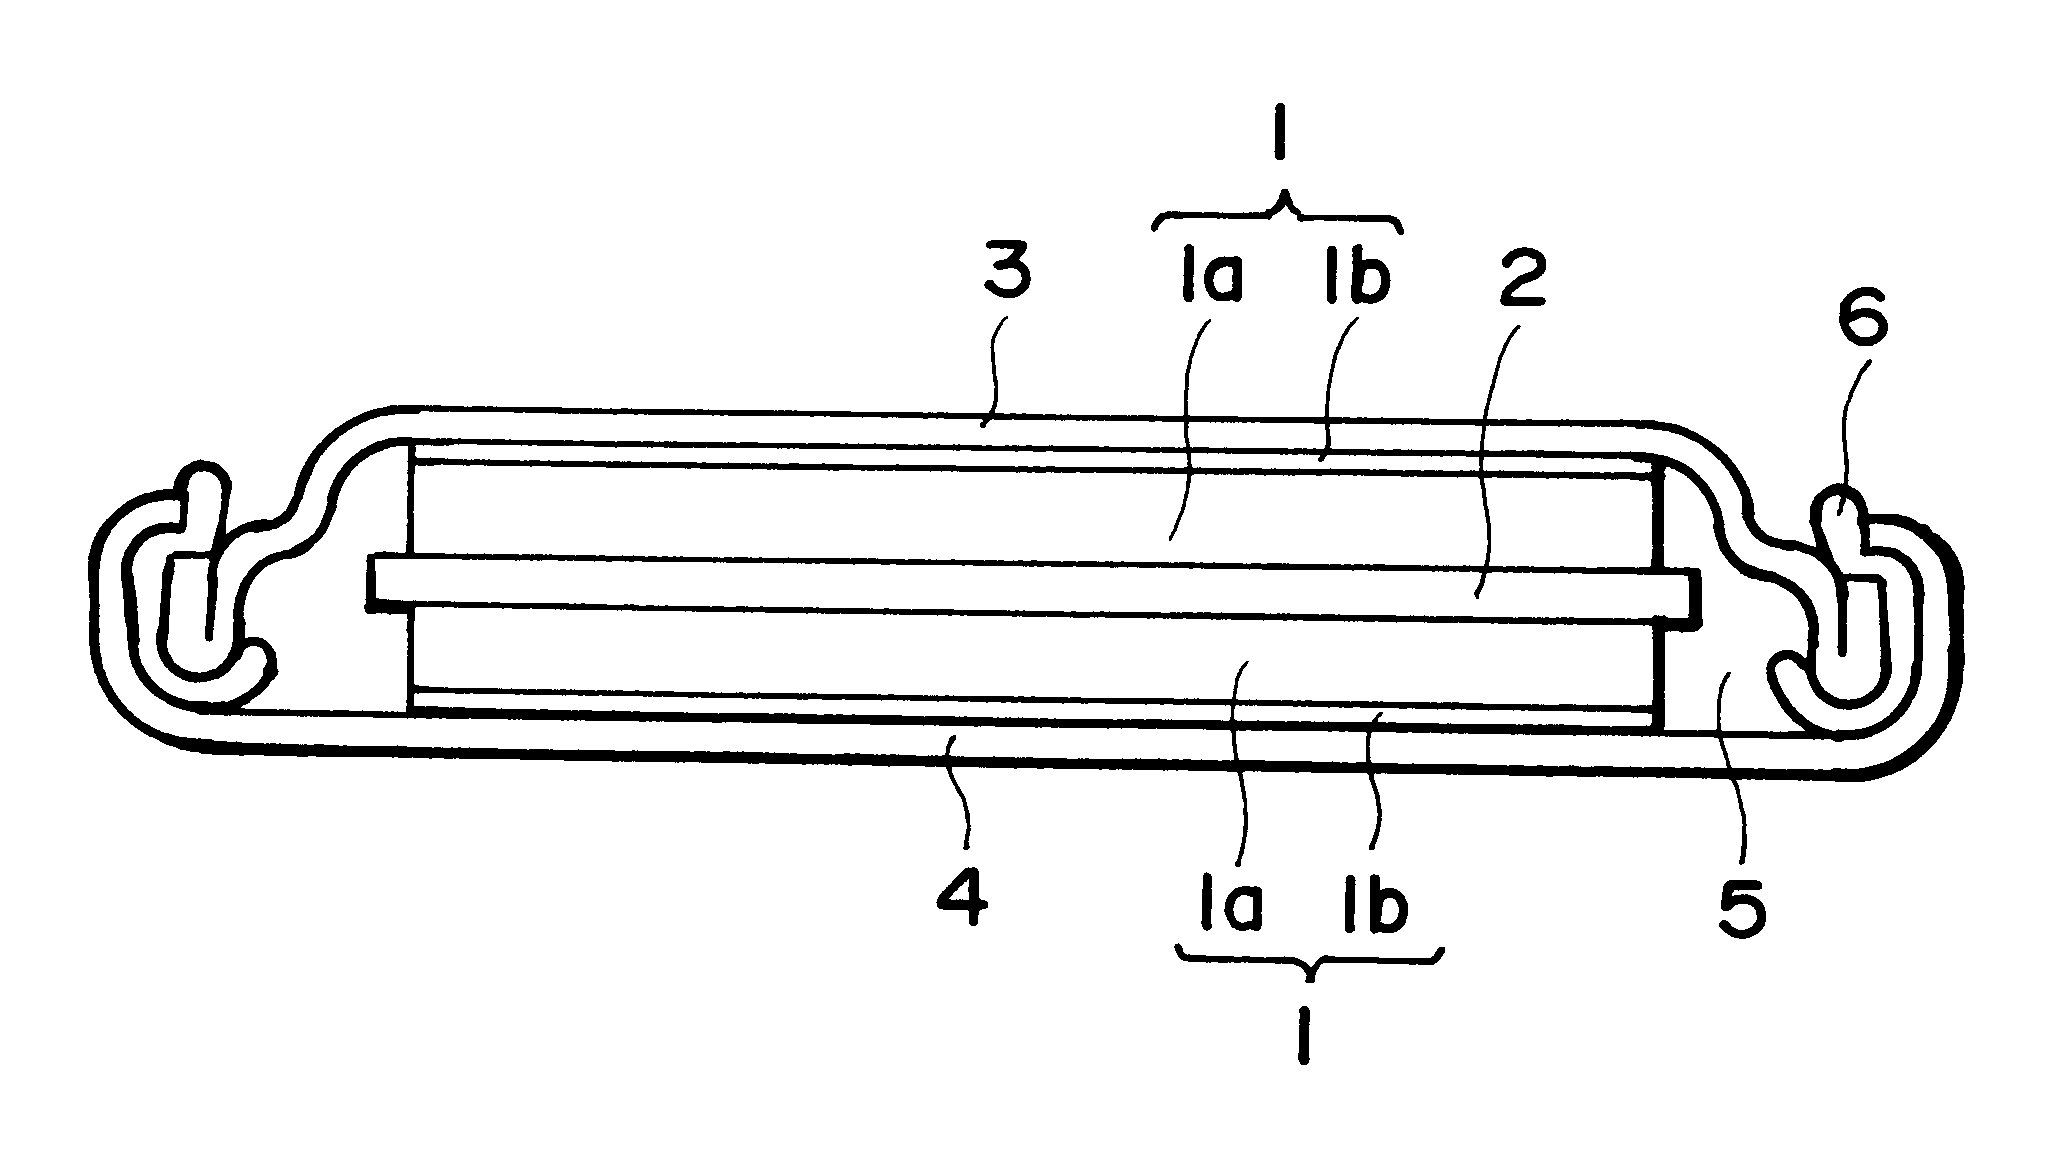 Electrode-forming composition, activated carbon electrode and electric double layer capacitor